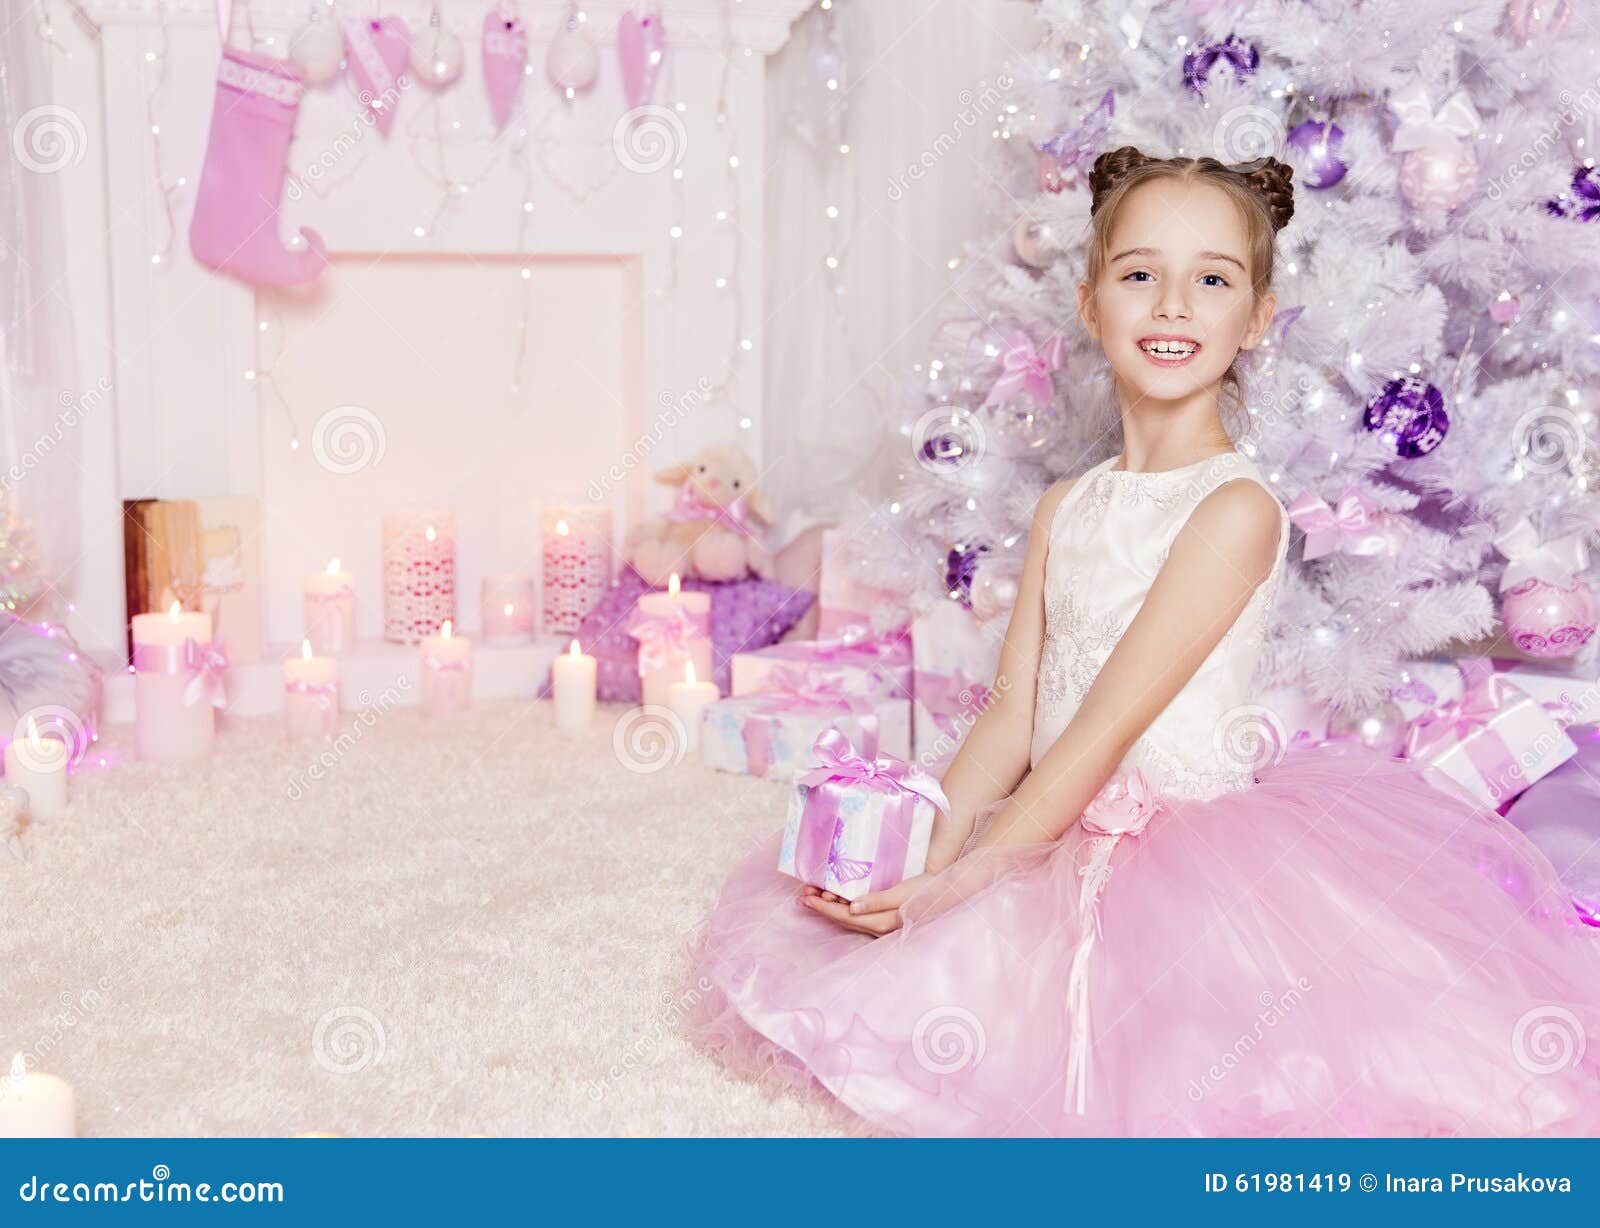 christmas child girl present gift, kid in decorated pink room